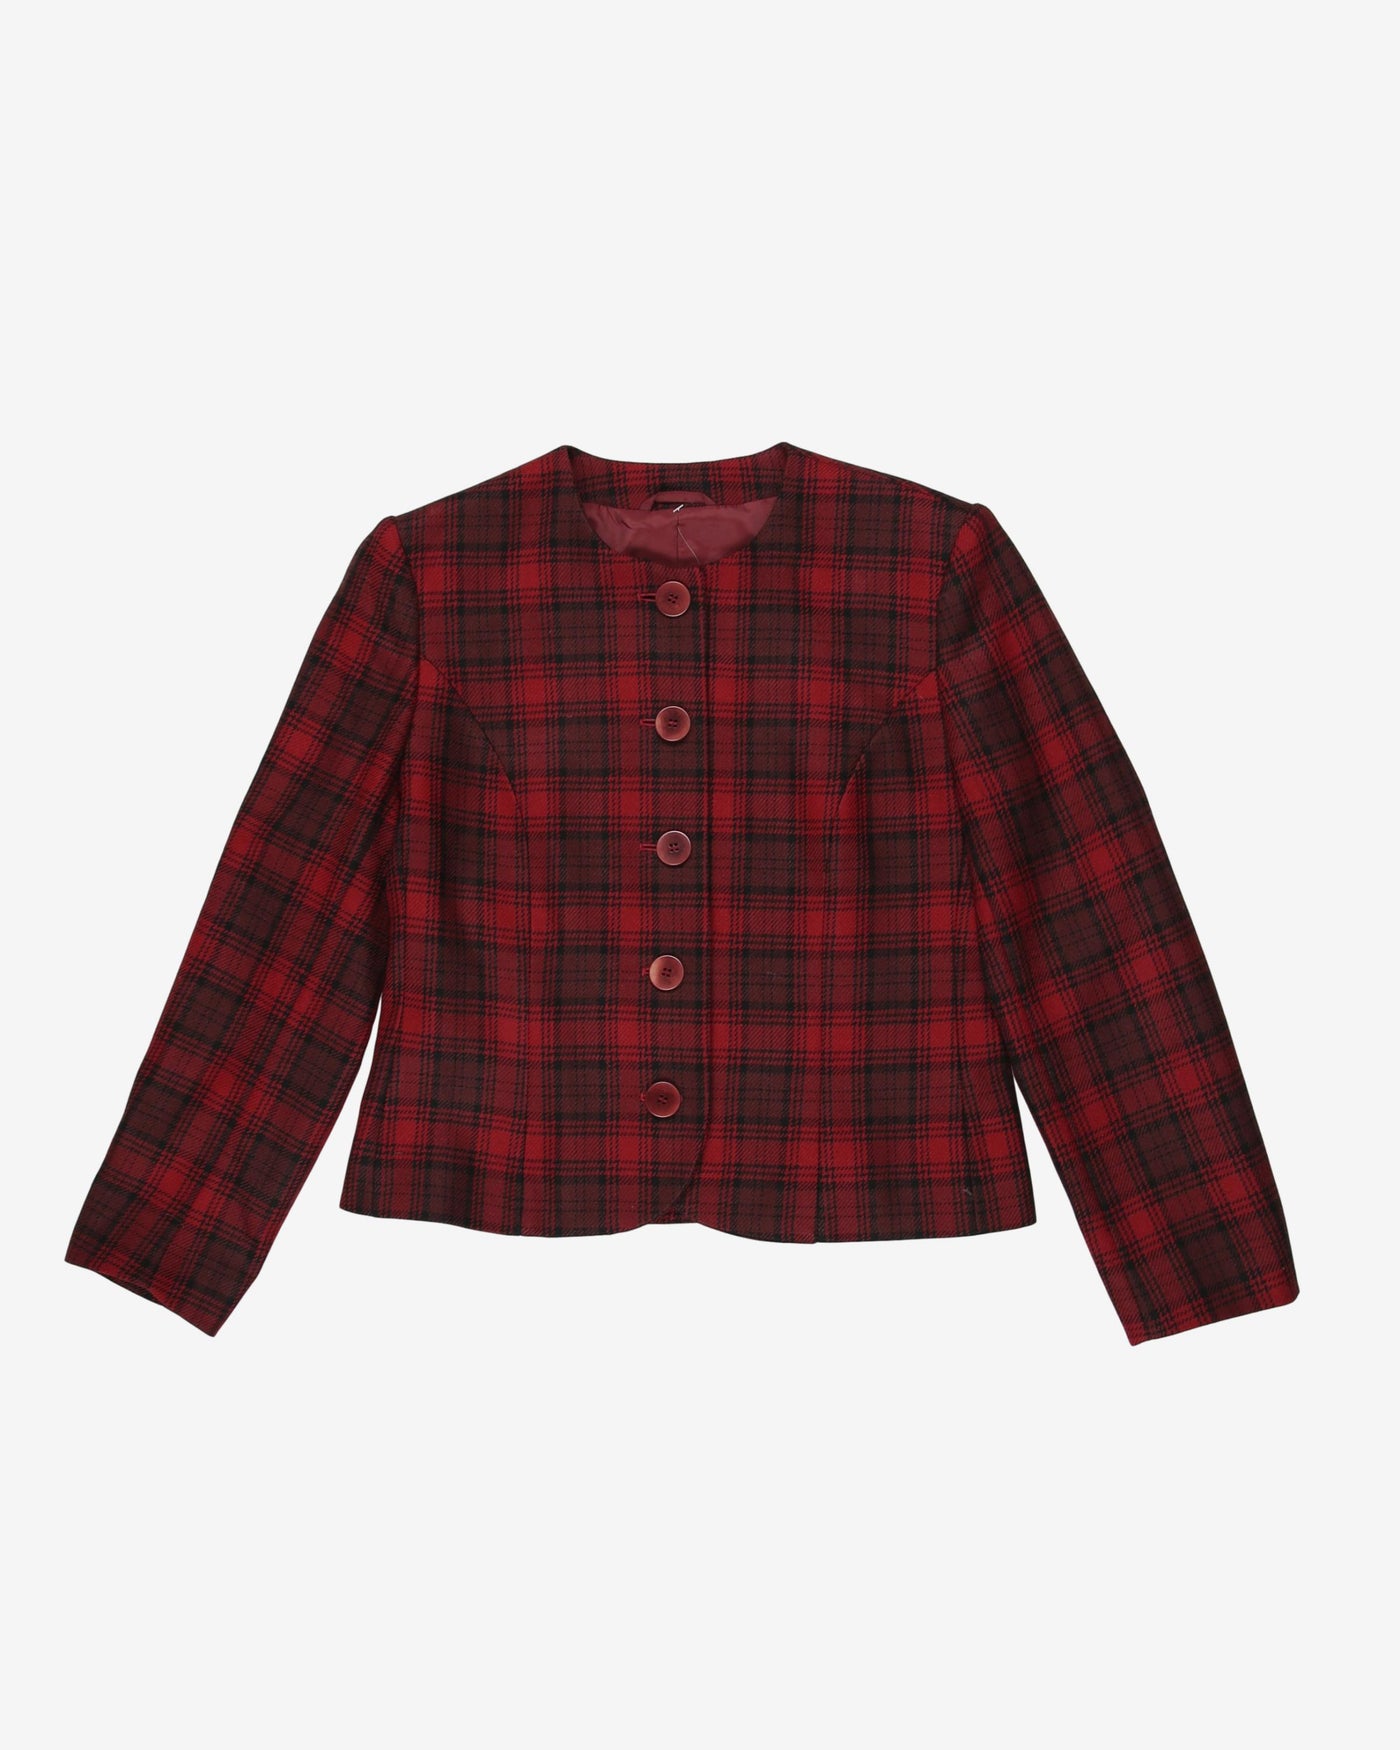 Burgundy and maroon checked jacket - S